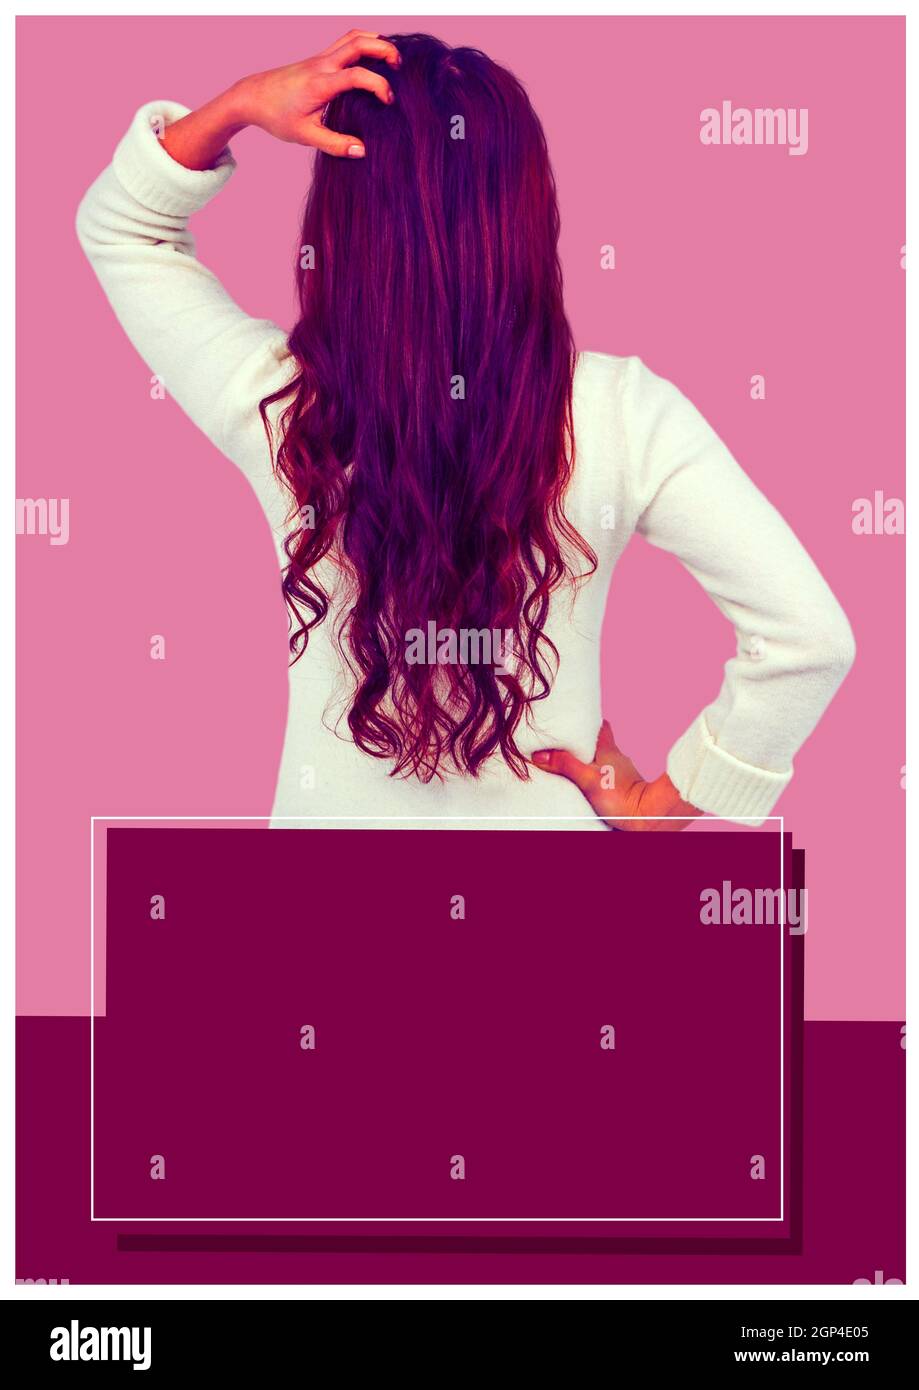 Composition of mixed race woman touching her hair on pink background Stock Photo